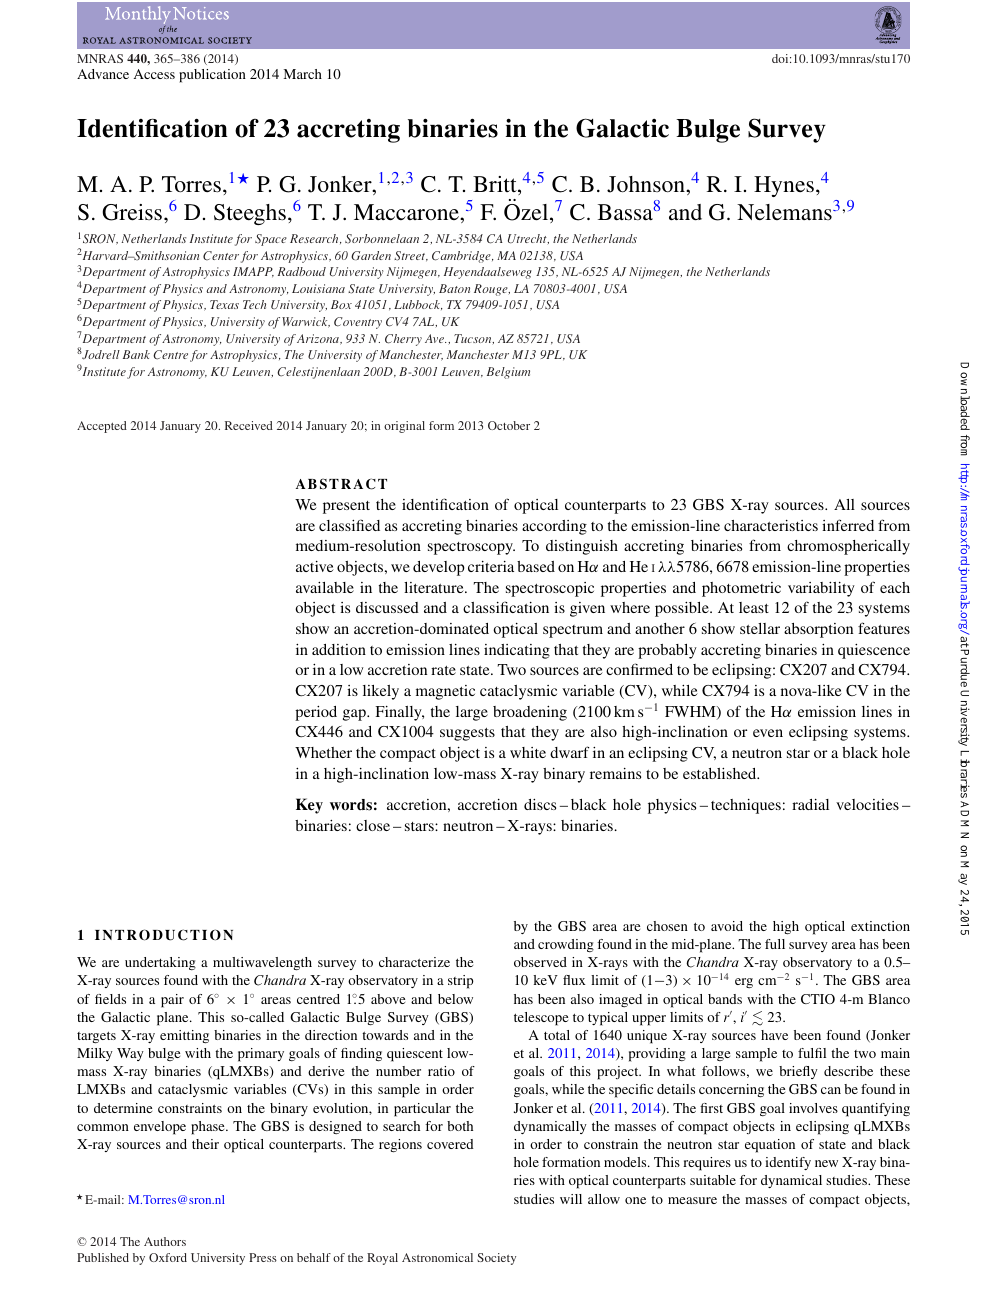 Identification Of 23 Accreting Binaries In The Galactic Bulge Survey Topic Of Research Paper In Physical Sciences Download Scholarly Article Pdf And Read For Free On Cyberleninka Open Science Hub